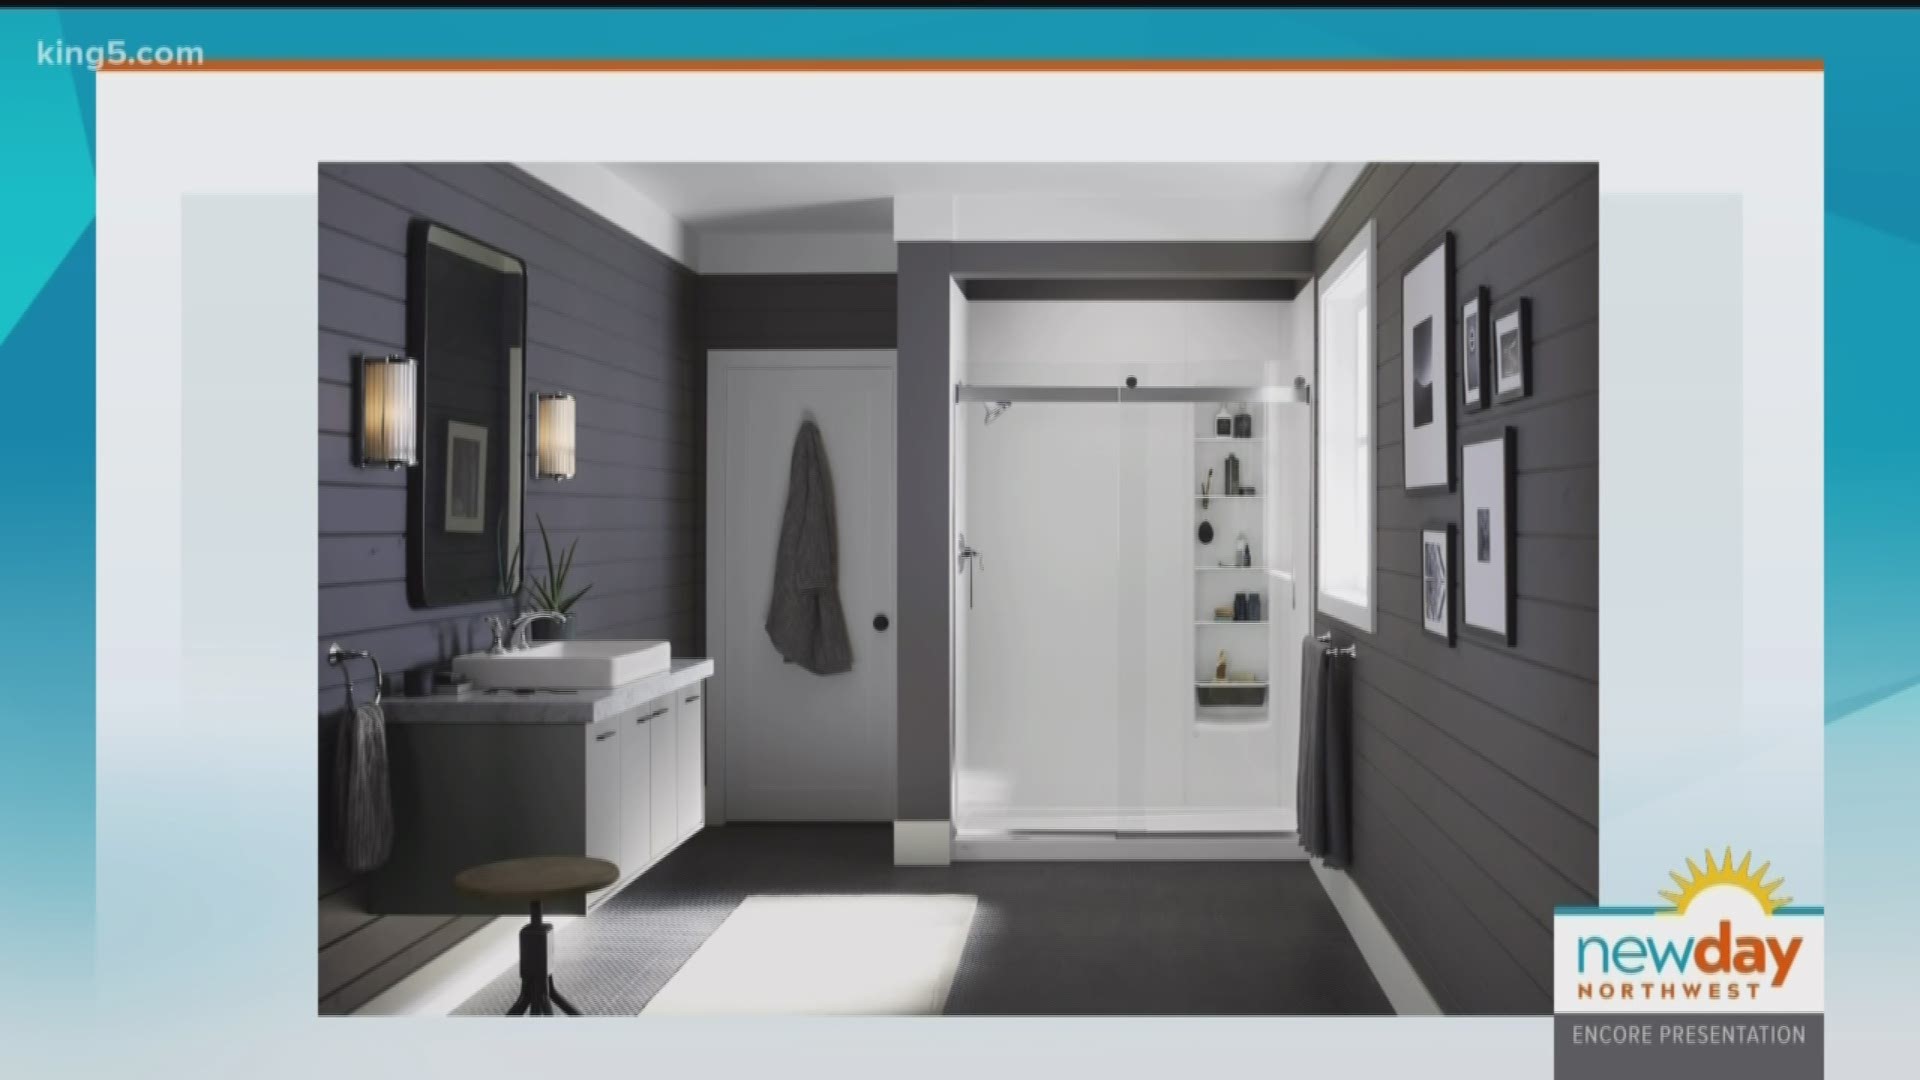 A Shower Guru works with you one-on-one to develop your ideal design. Sponsored by Pacific Bath Company.